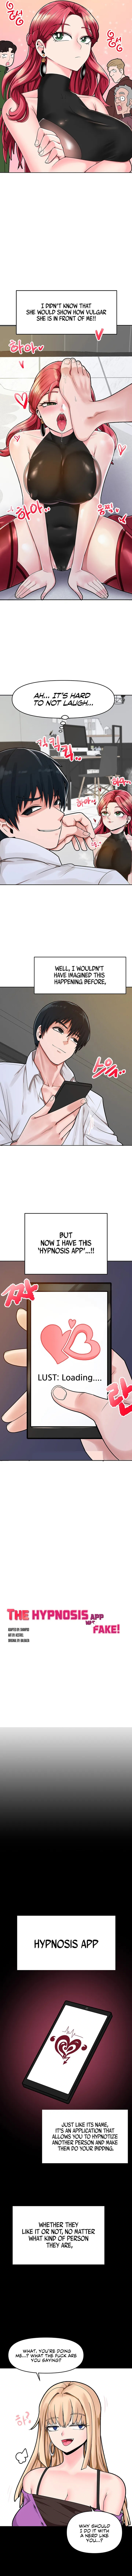 The Hypnosis App was Fake - Chapter 1 Page 6